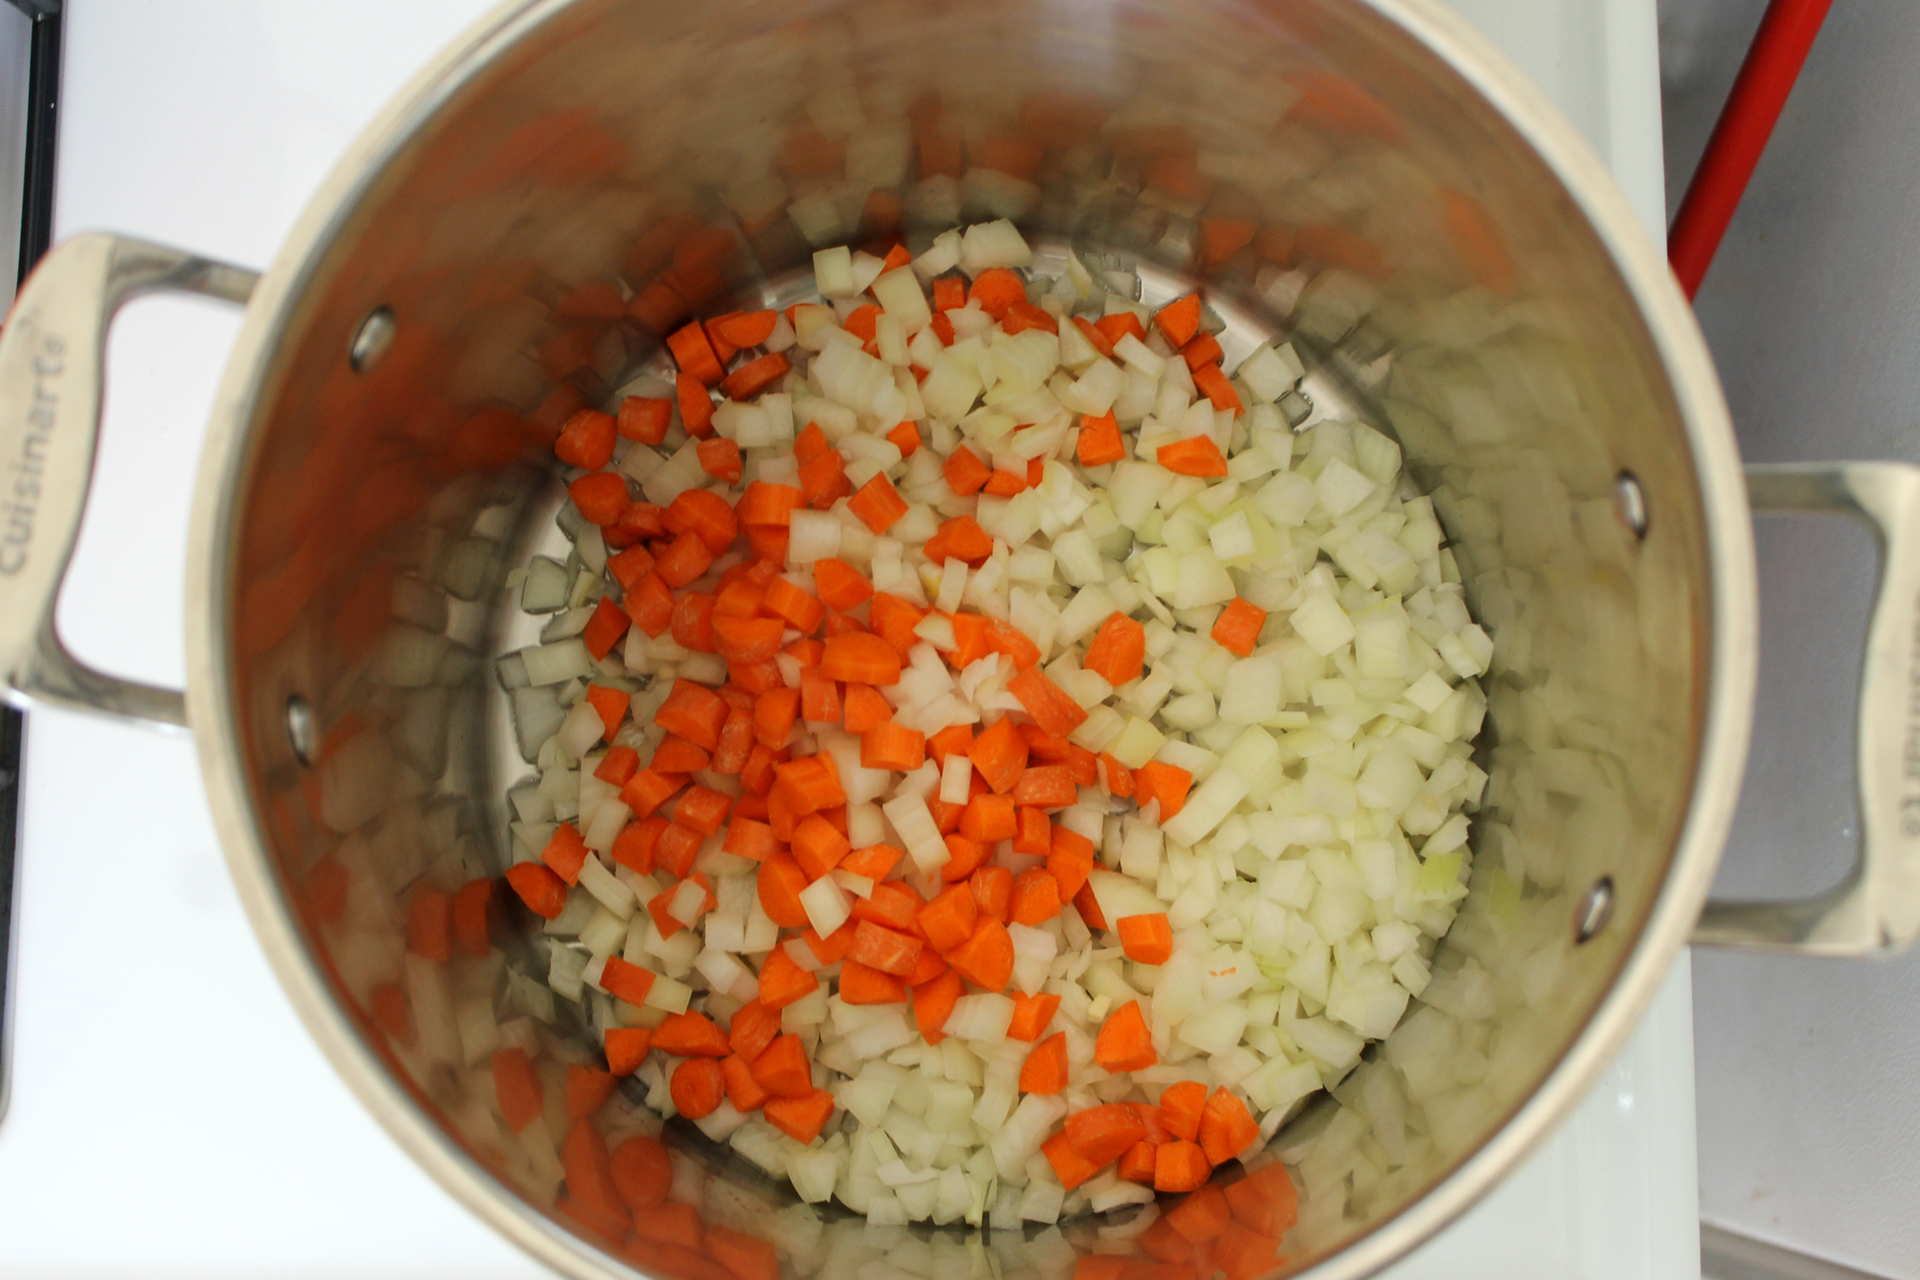 Carrots and onions add a touch of sweetness and complexity to the bone broth.